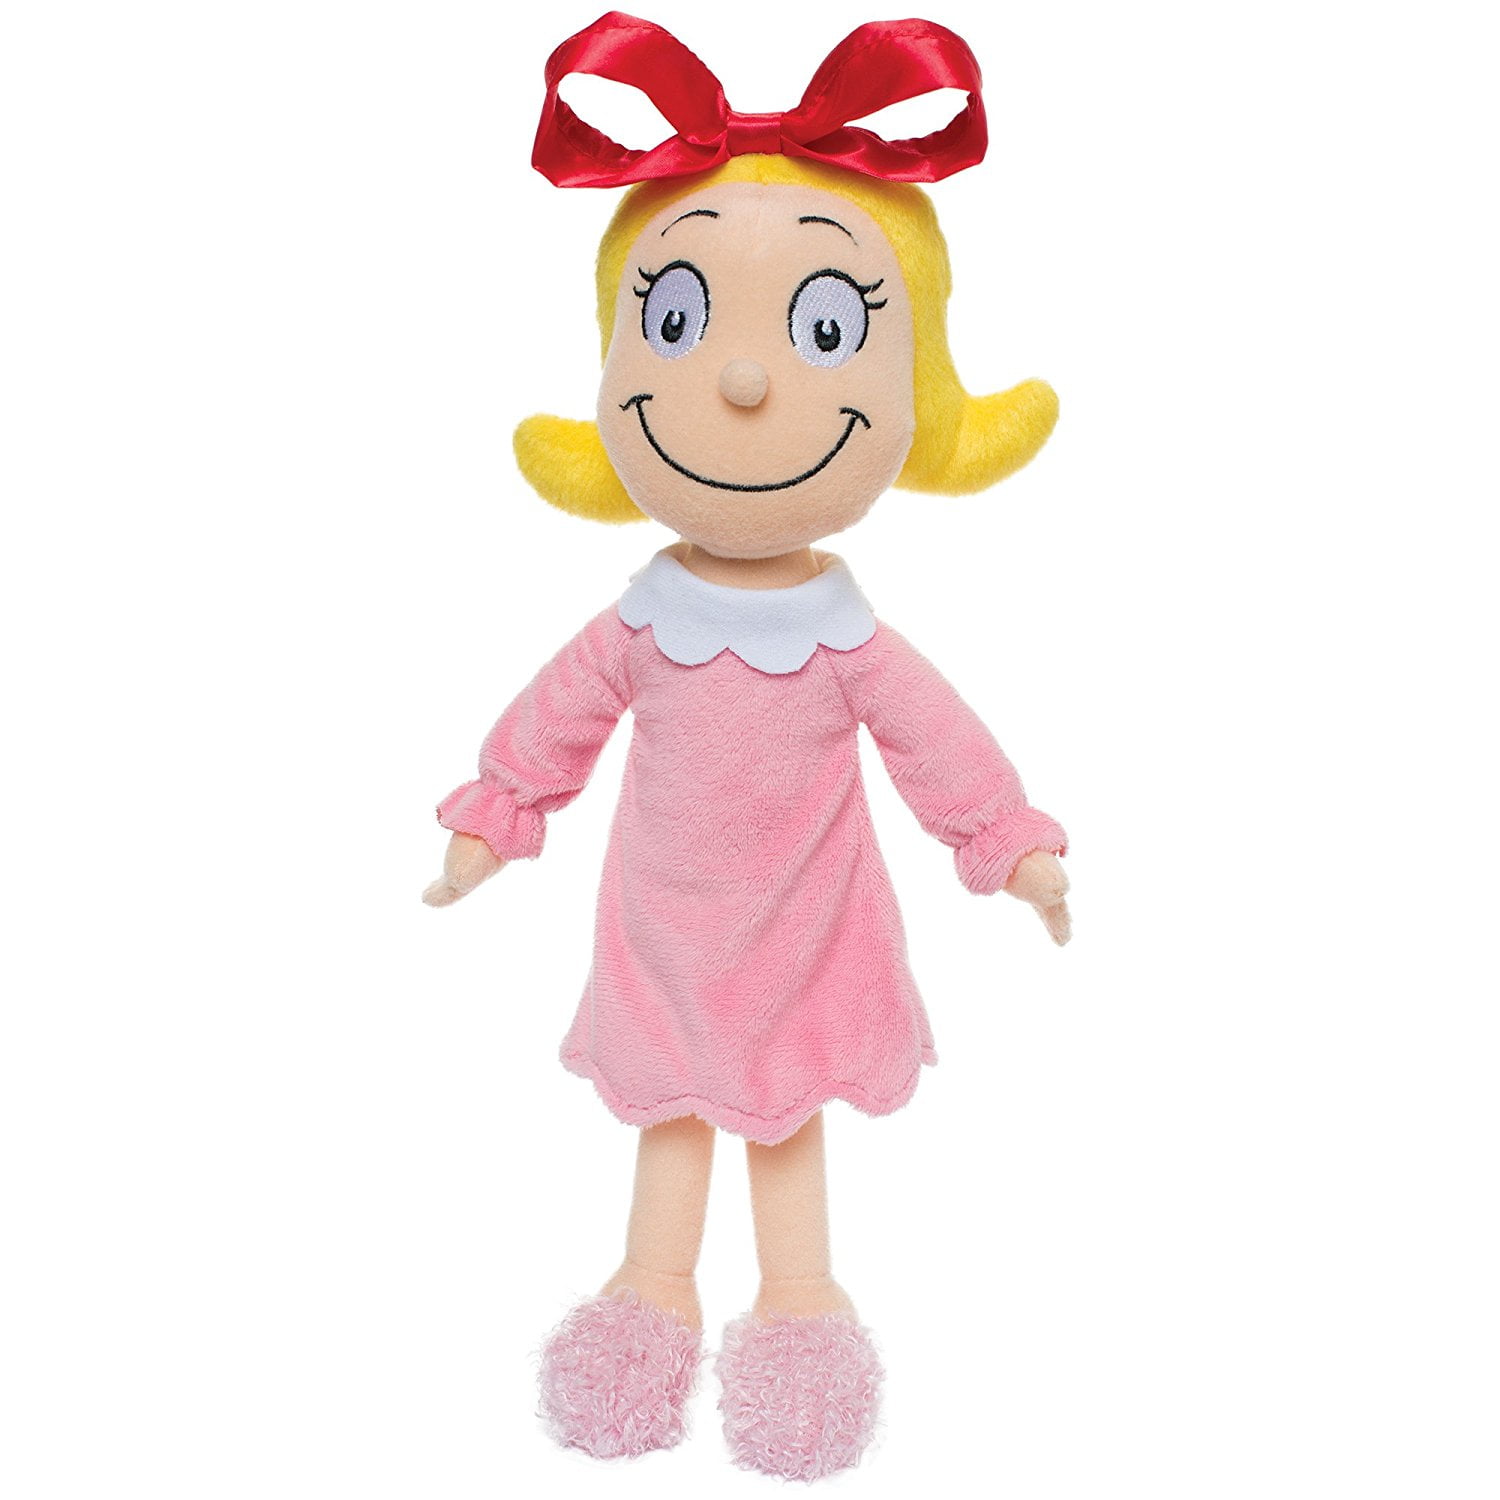 Buy Dr. Seuss Cindy Lou Who 15" Soft Doll, Cindy Lou who will brighten...